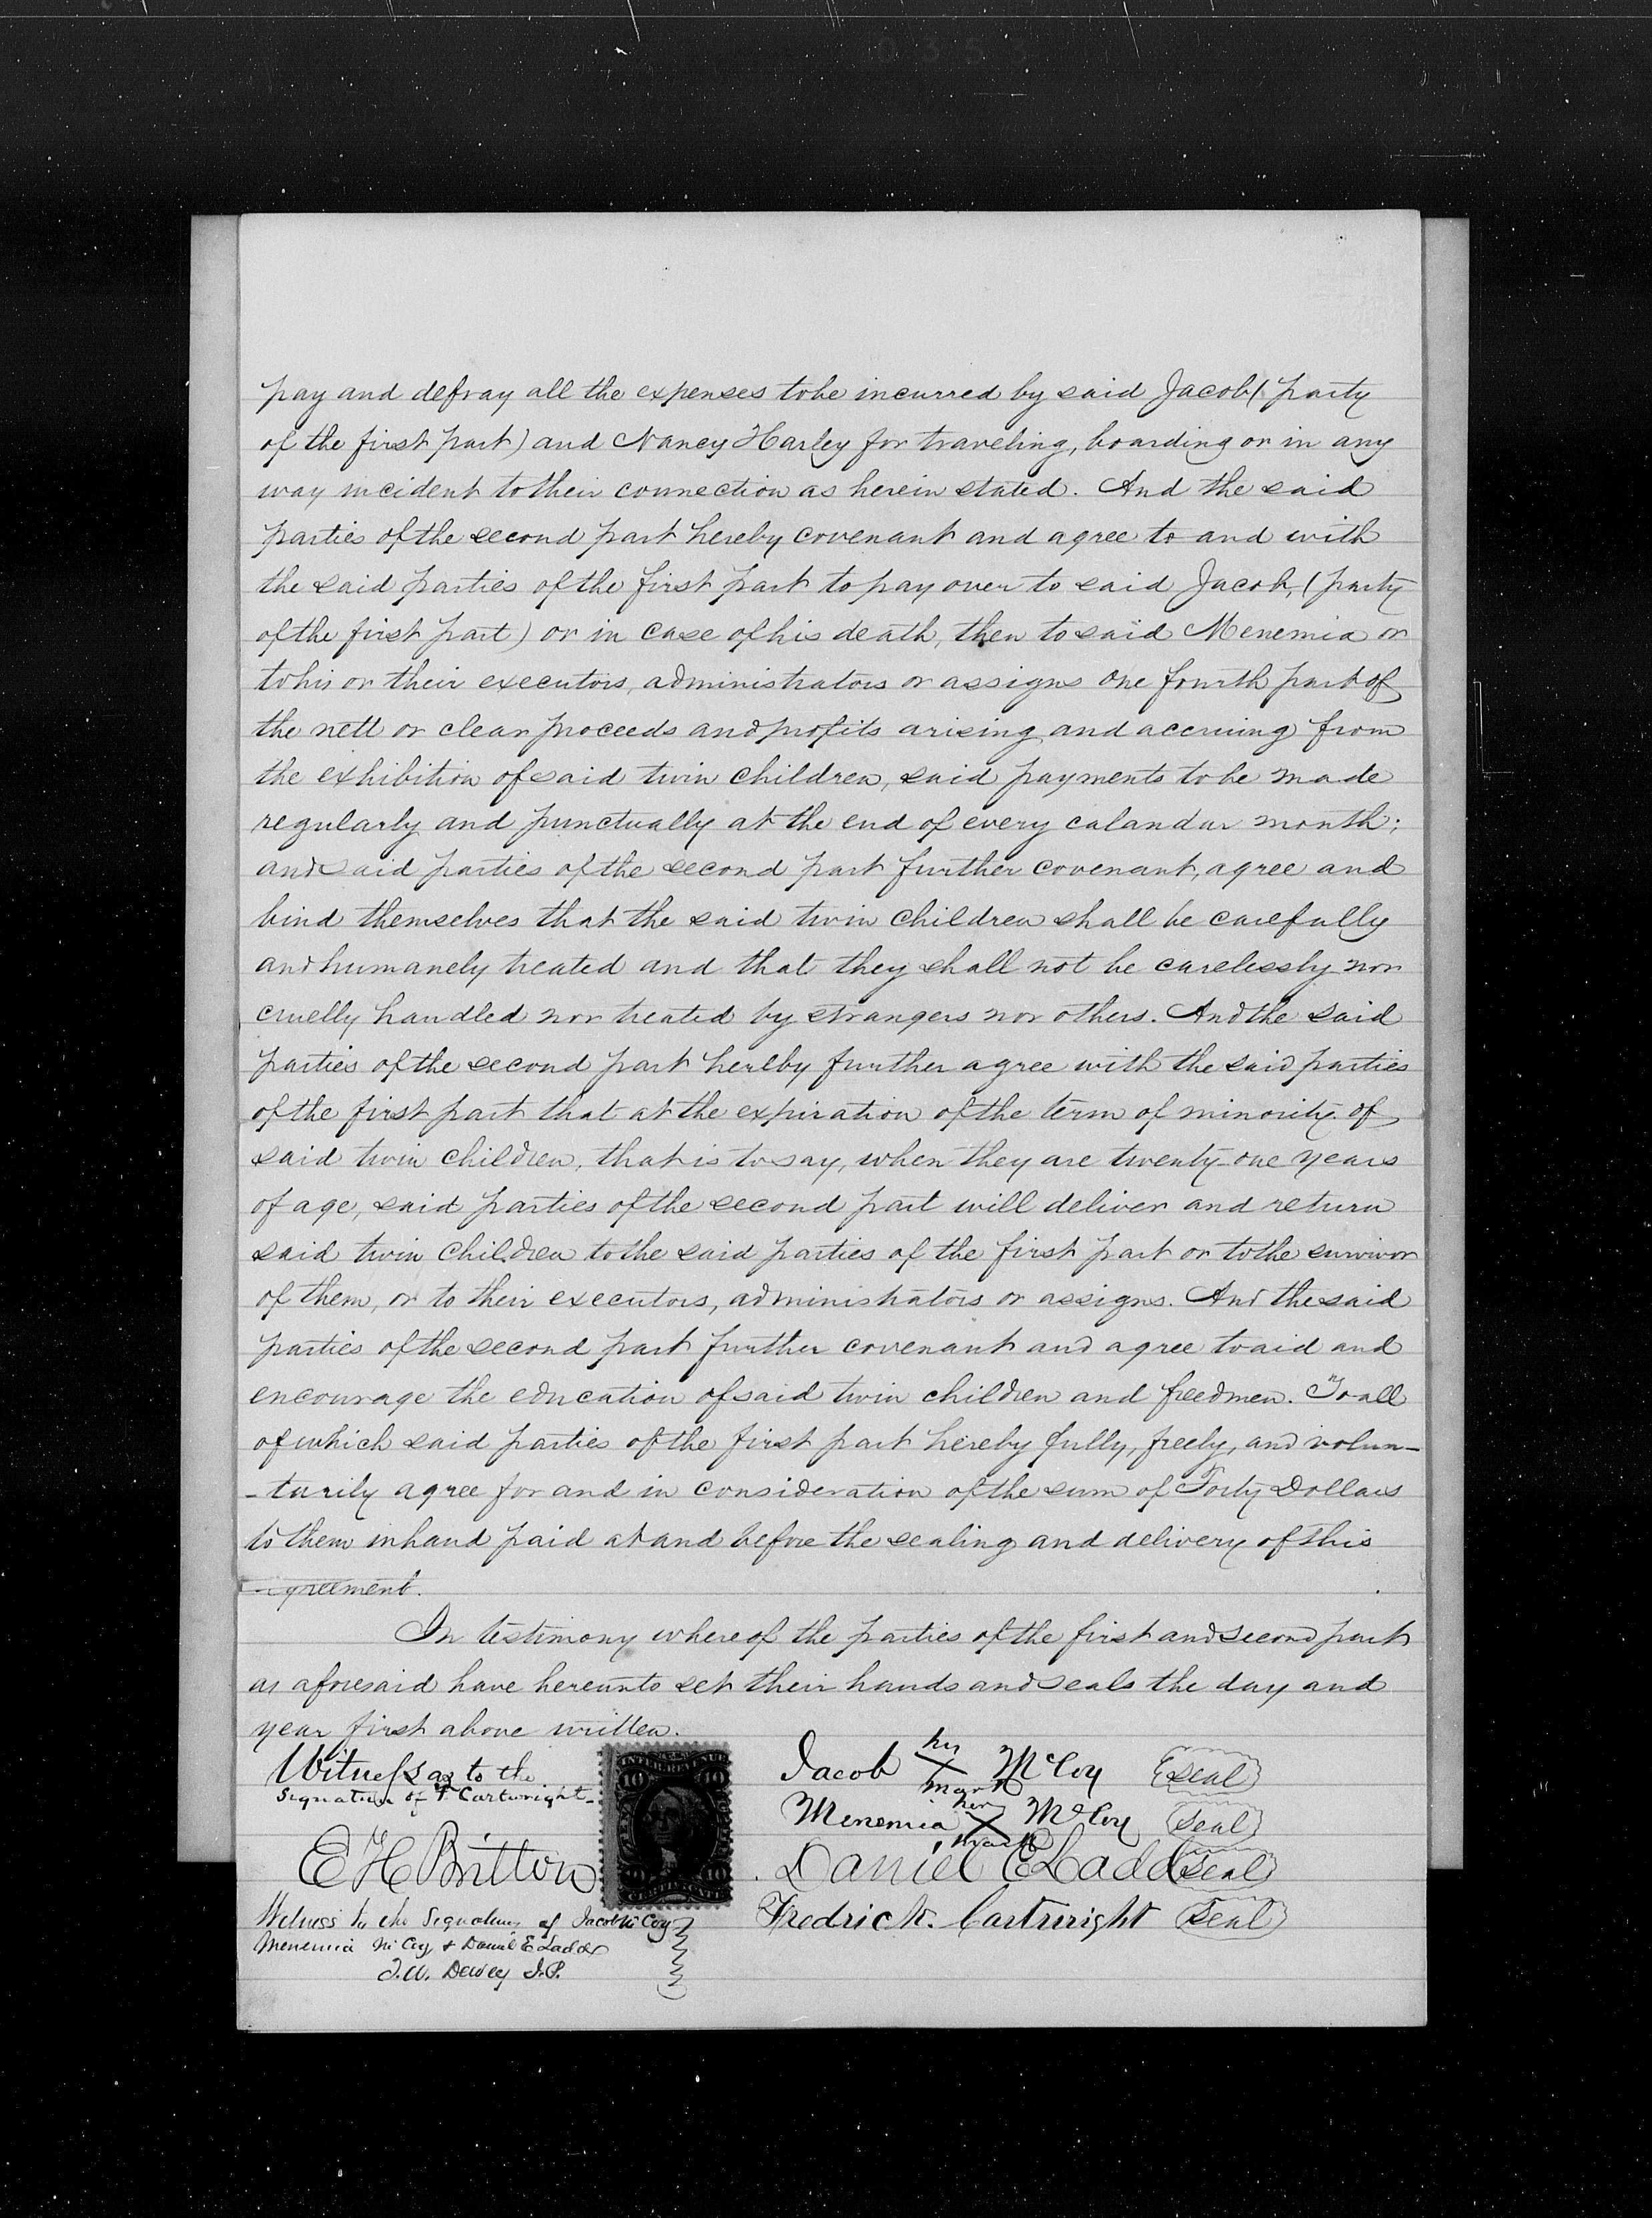 Image of contract